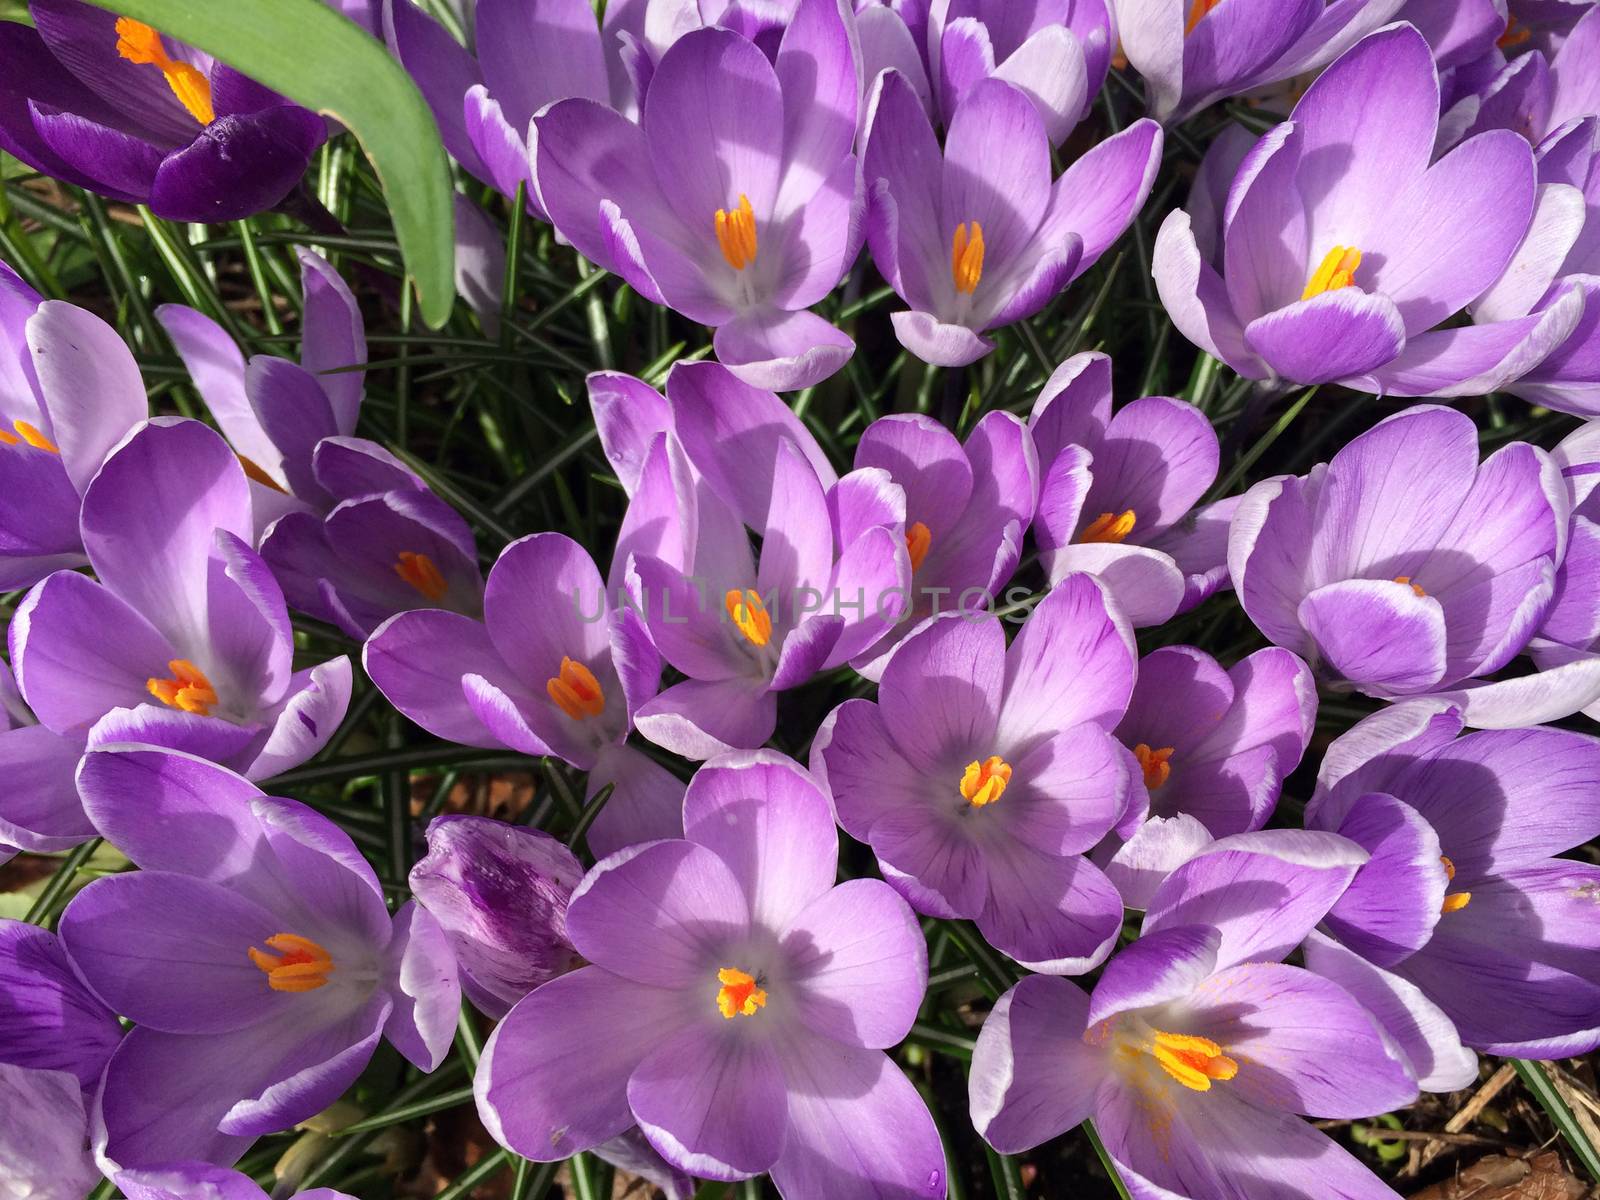 Tiny violet crocus flowers blooming in nature